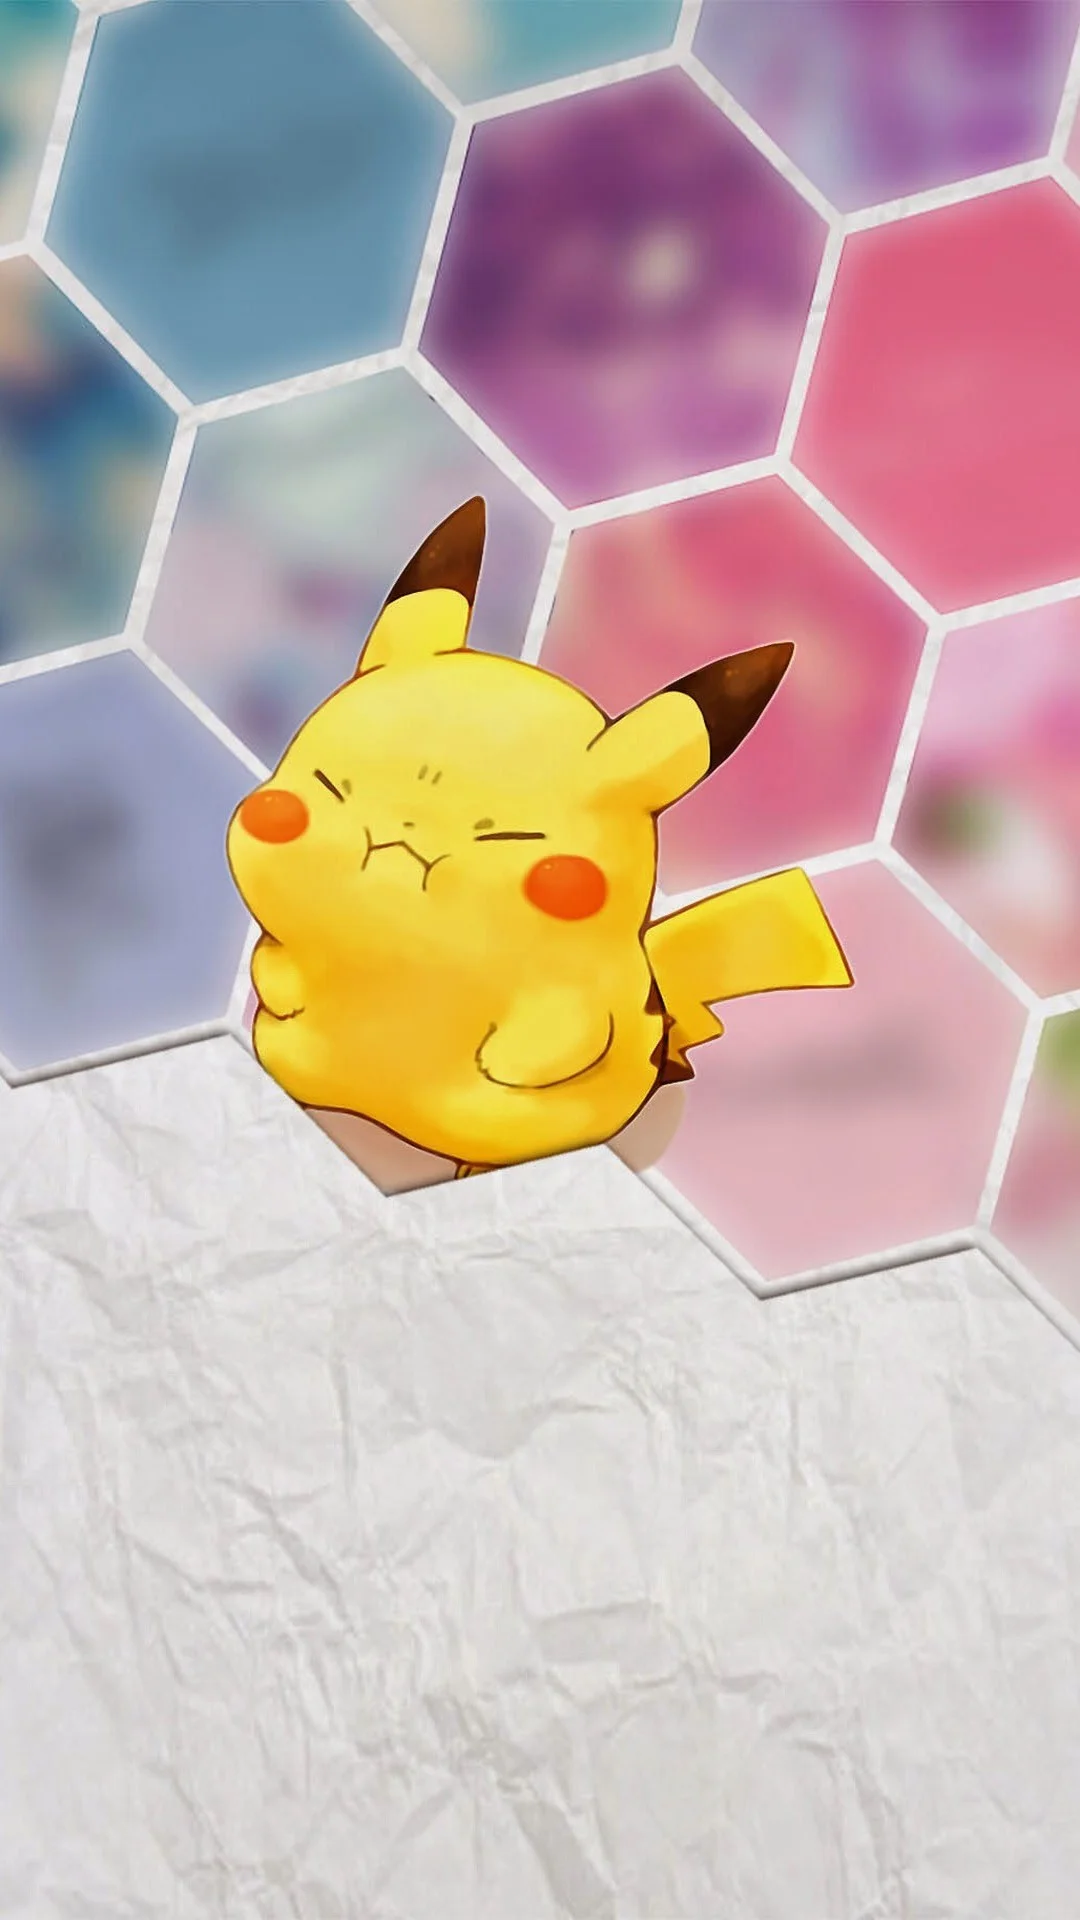 Tap image for more iPhone 6 Plus Pikachu wallpapers! Pikachu – @mobile9 |  Cute